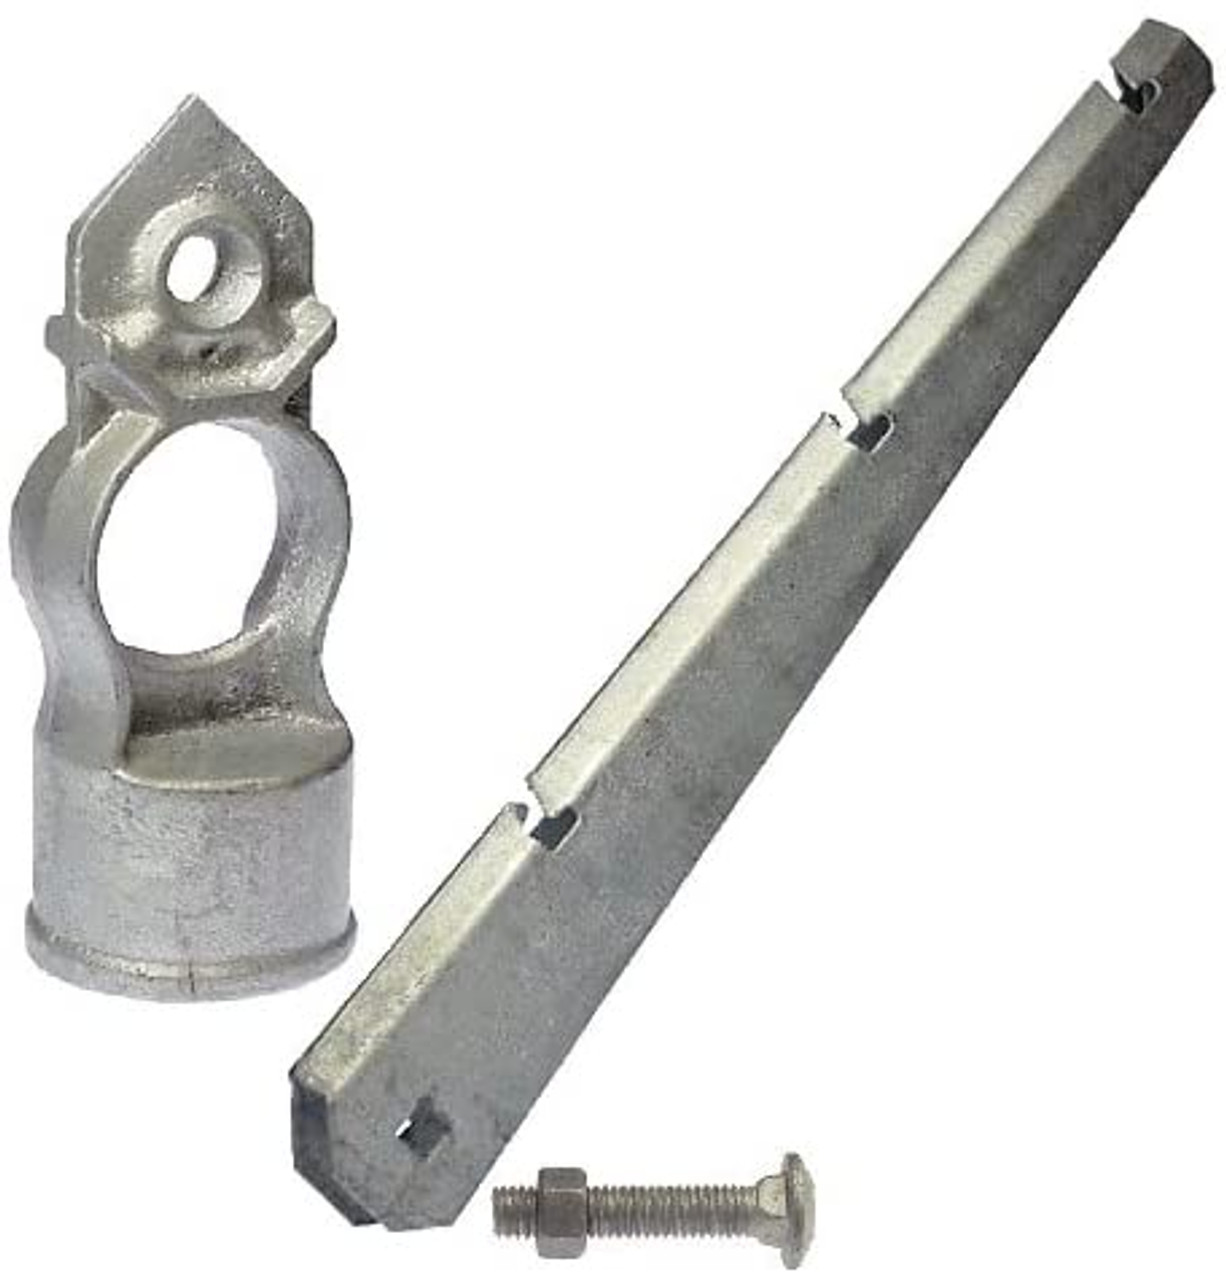 Barb Arm Base allows attachment of barb arm blade at any angle
Adjustable angle of Barb bracket, 